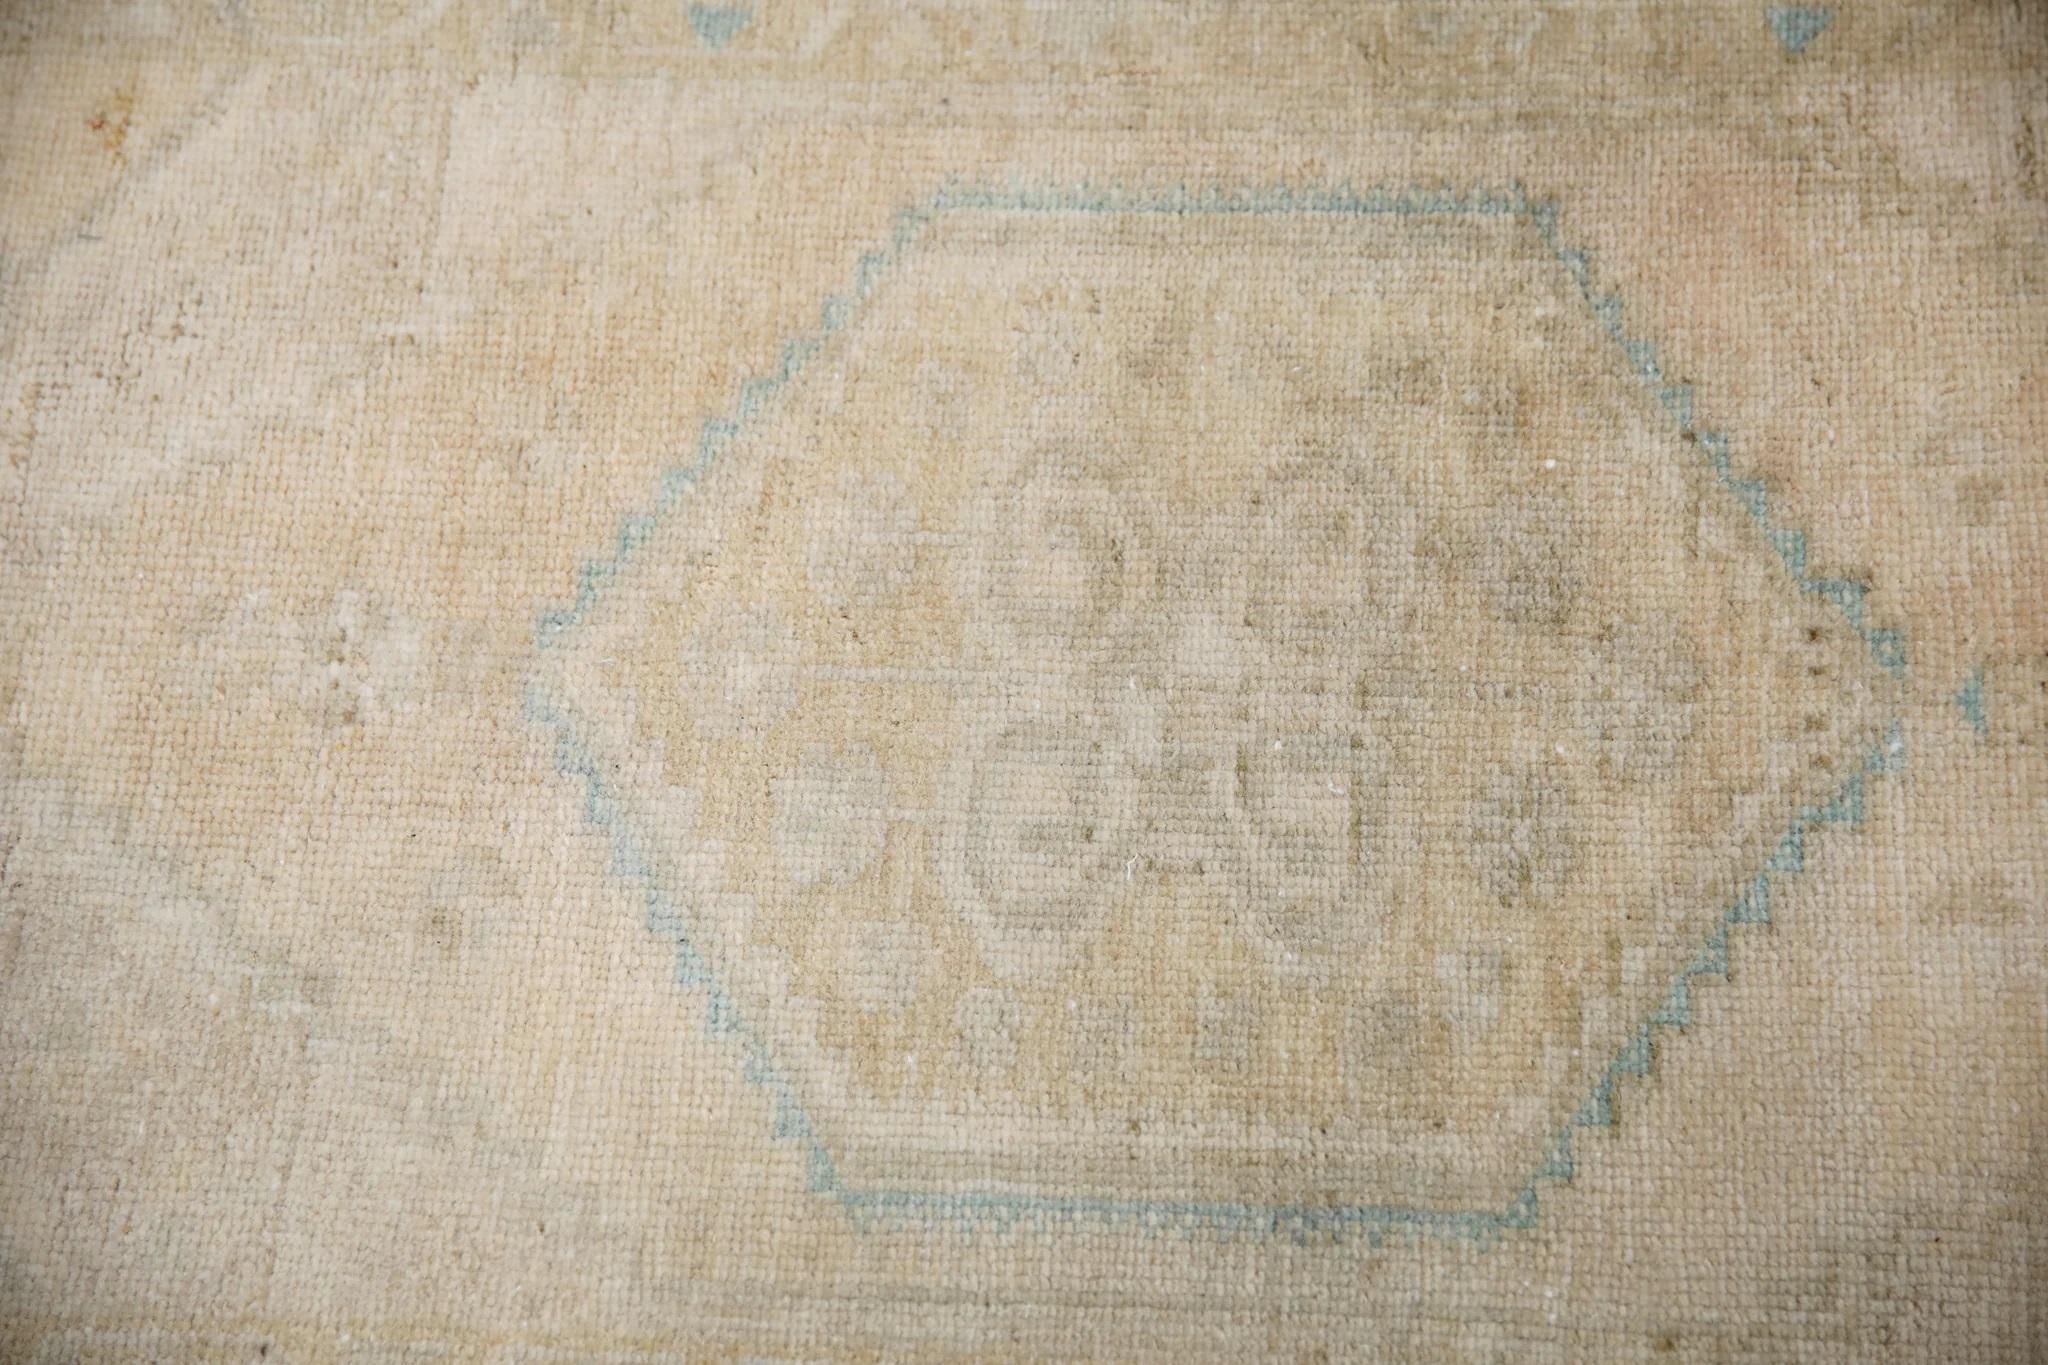 Introducing our exquisite vintage mini Turkish rug, expertly crafted by skilled artisans using traditional techniques that have been perfected over centuries. Made entirely from 100% handwoven wool, this rug boasts a soft and durable texture that